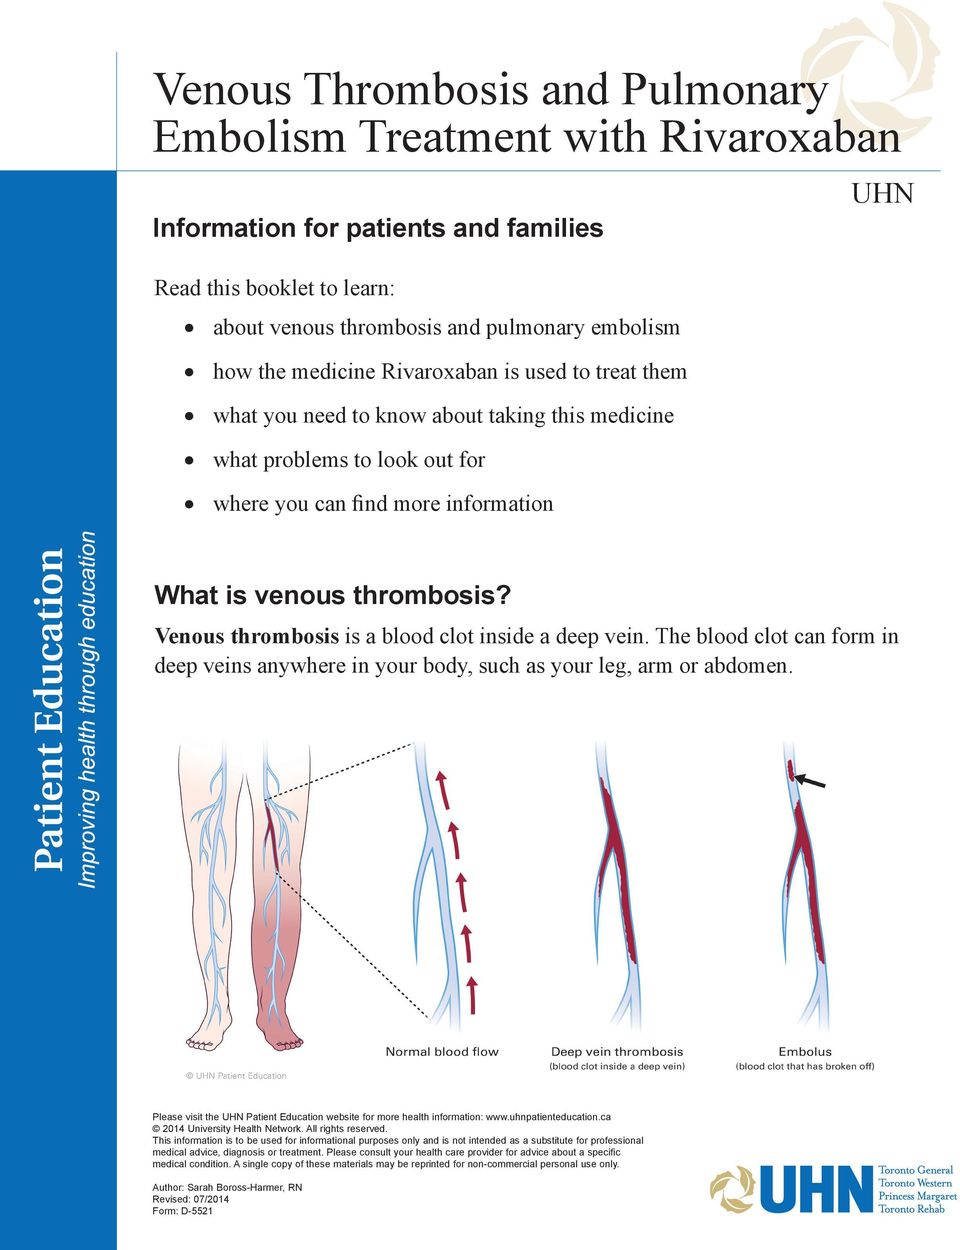 Venous thrombosis is a blood clot inside a deep vein. The blood clot can form in deep veins anywhere in your body, such as your leg, arm or abdomen.